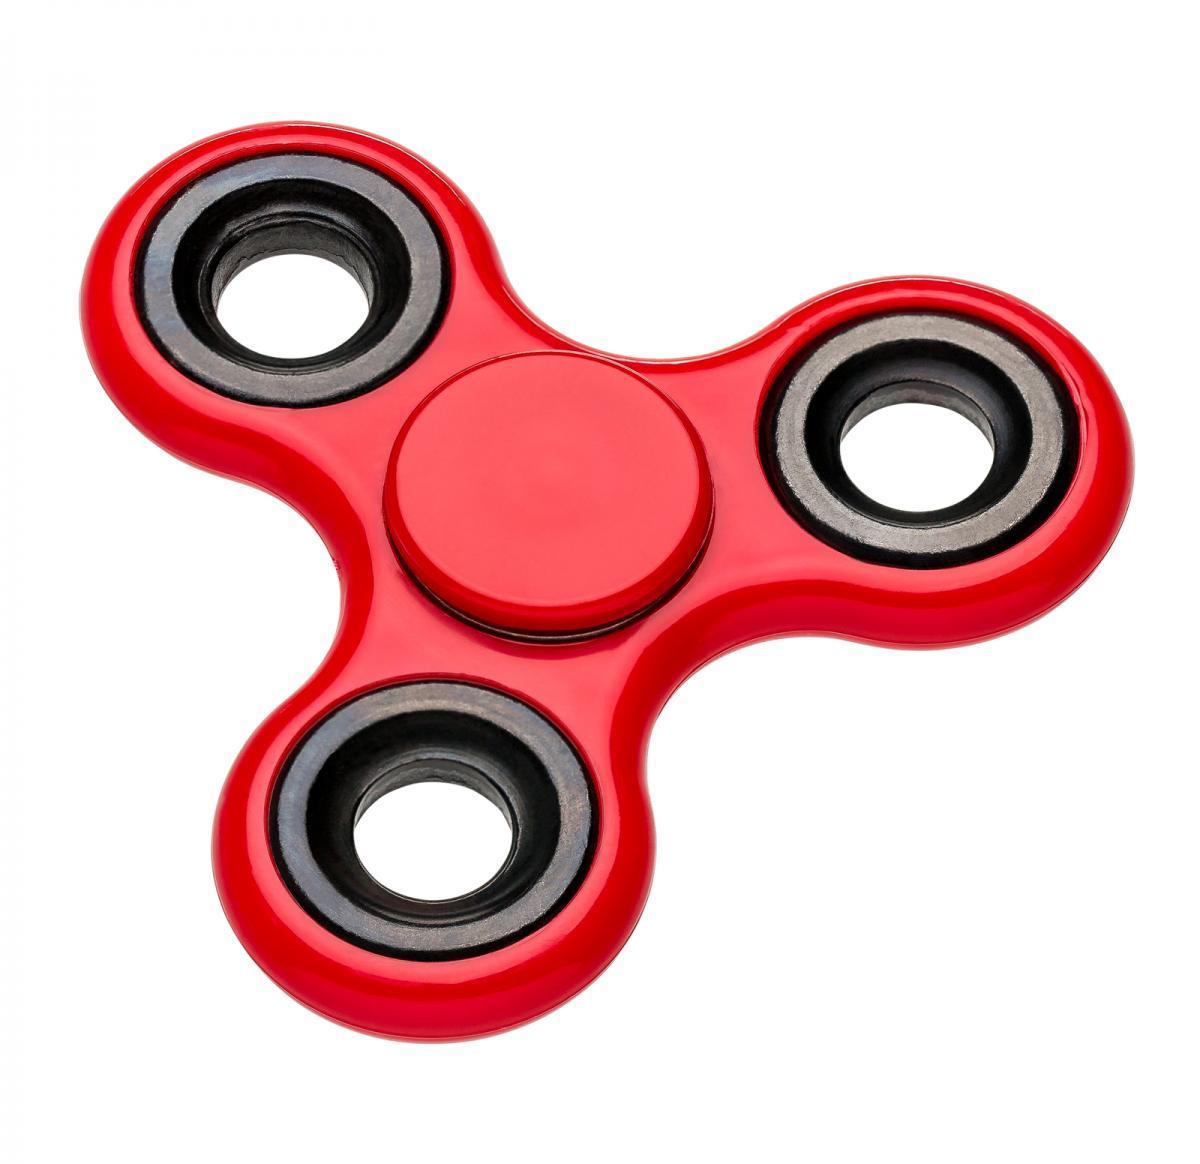 Promotional Red Fidget Spinners